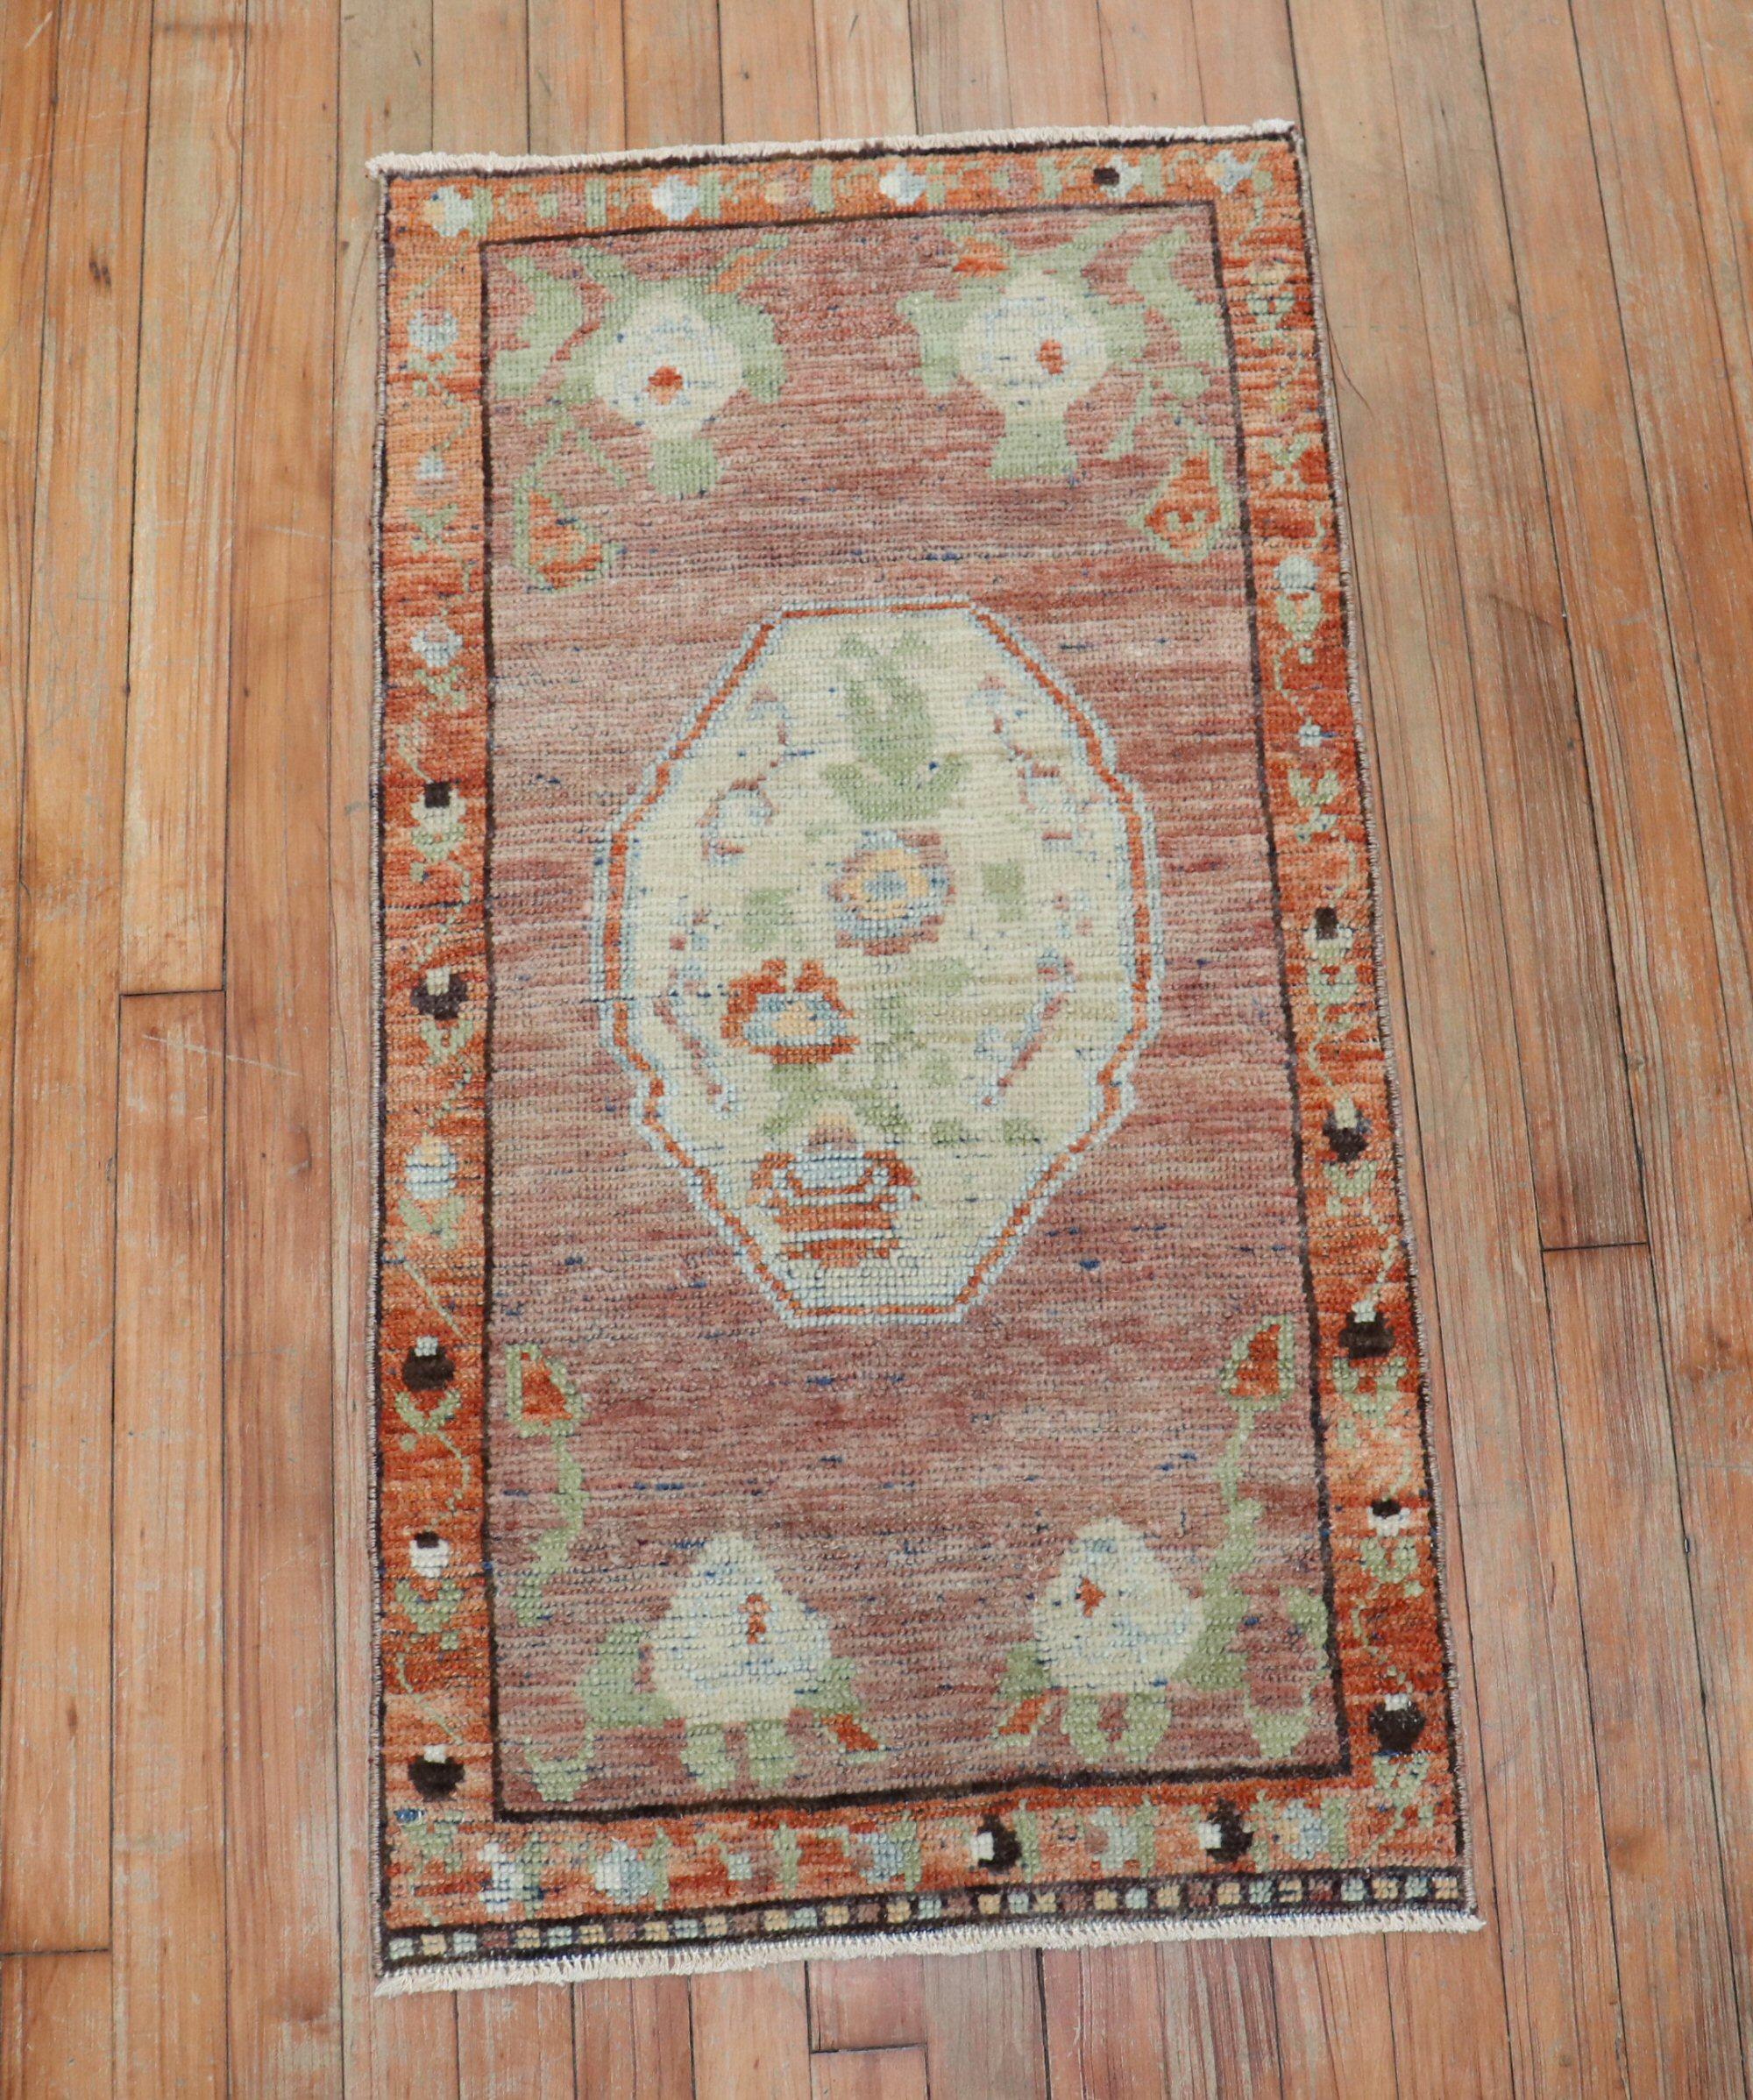 Vintage Turkish Yastik rug with peach, ivory, and green accents and a floral motif

Measures: 21